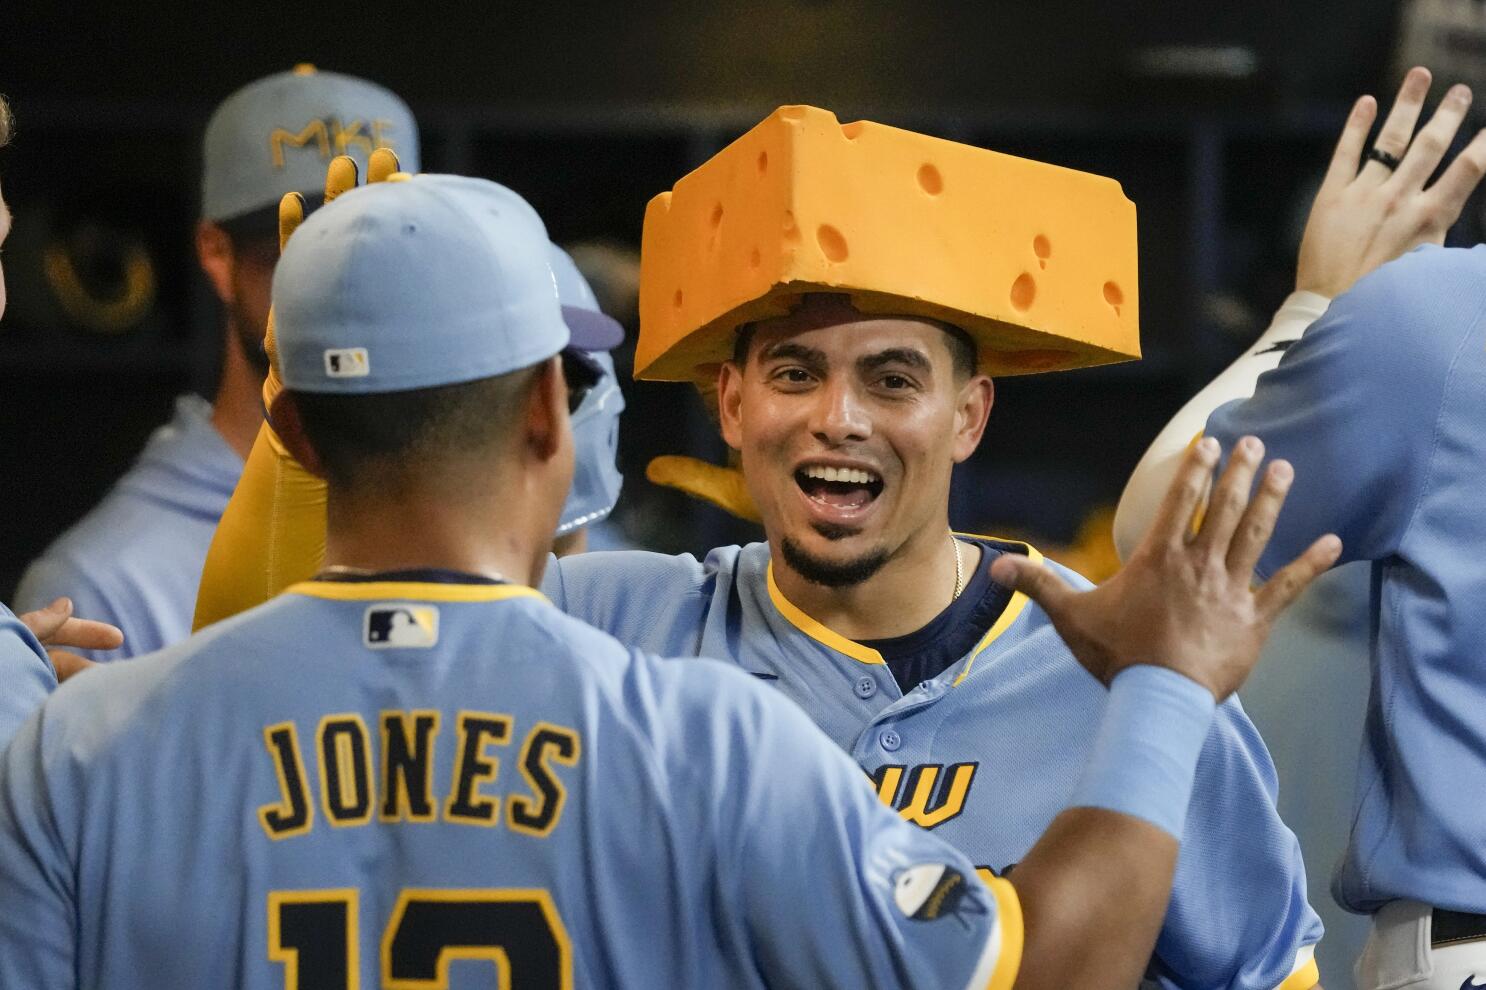 Wiemer, Adames, Burnes carry Brewers to 7-3 win over NL Central